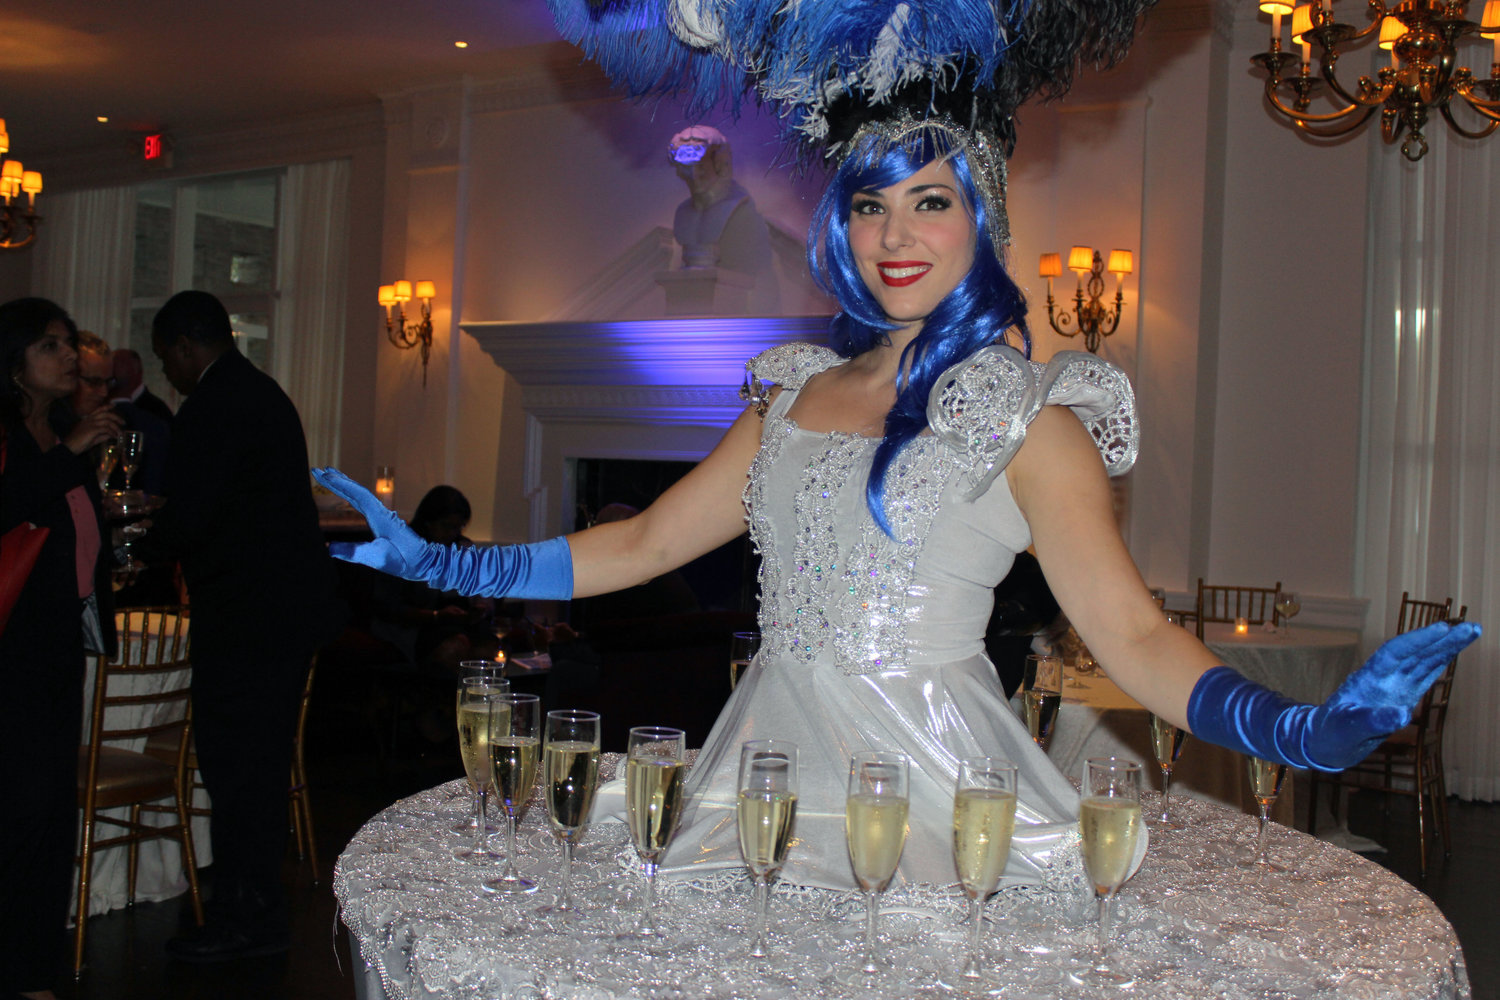 A performer wore a shimmering “champagne dress” that was fastened to a table and lined with glasses of champagne that she served to guests.